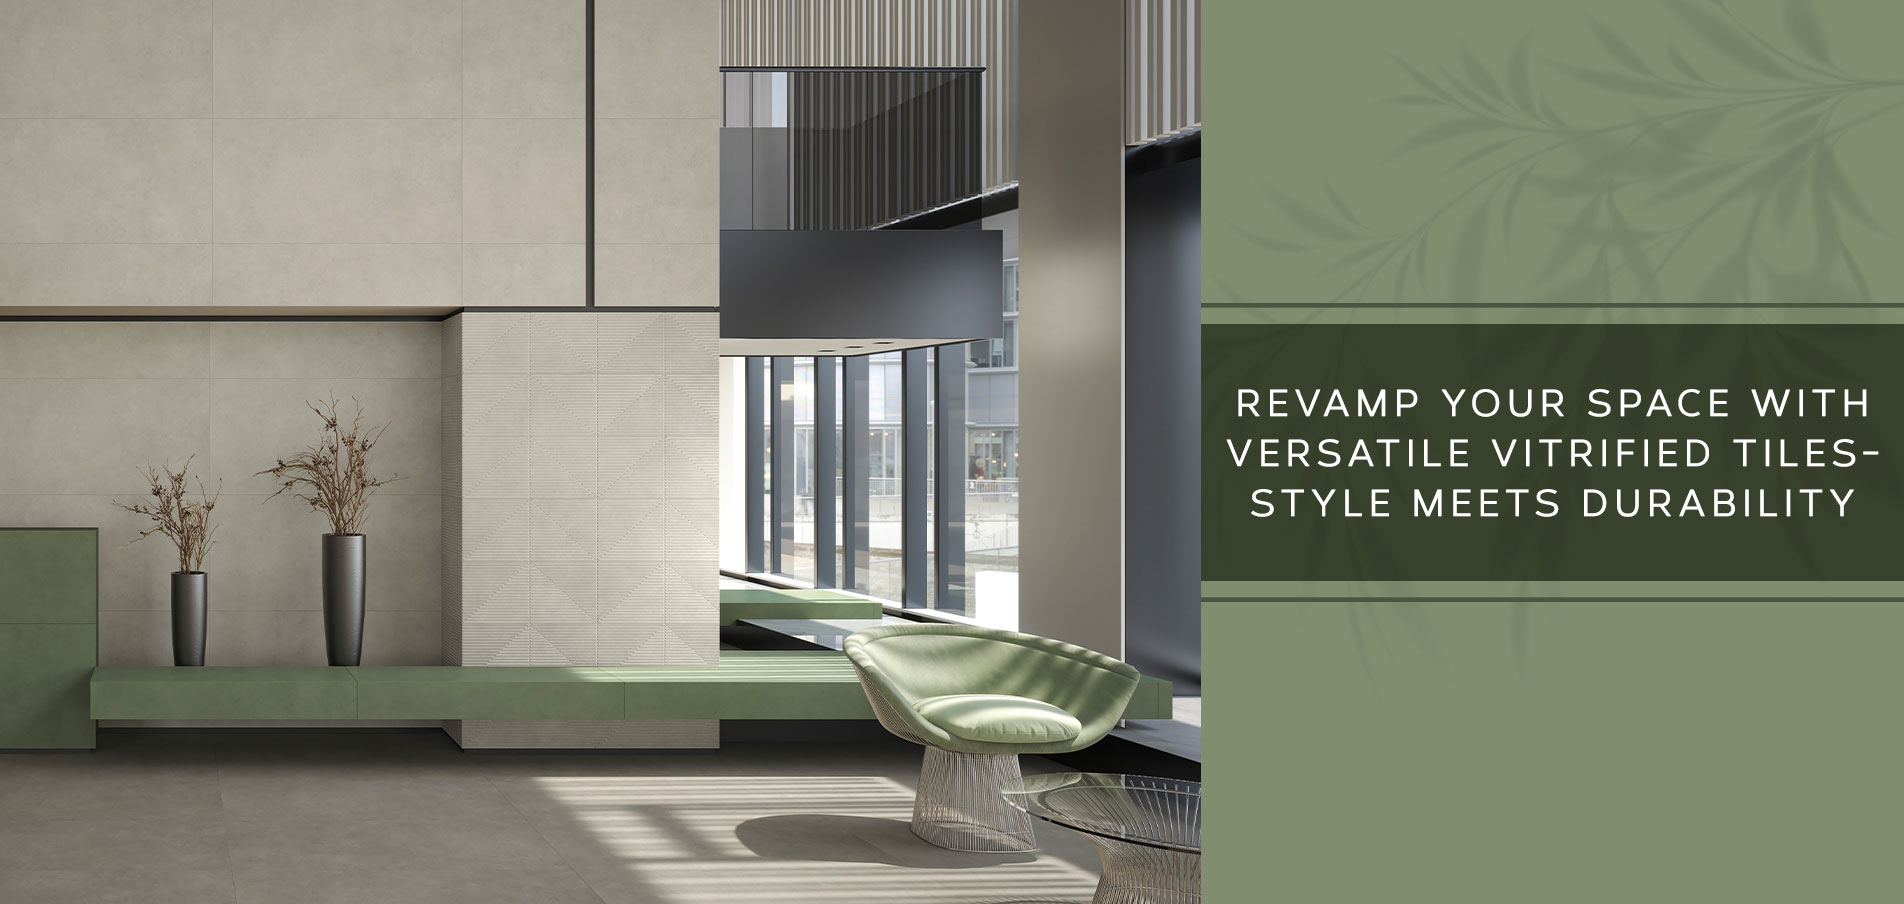 Revamp Your Space with Versatile Vitrified Tiles